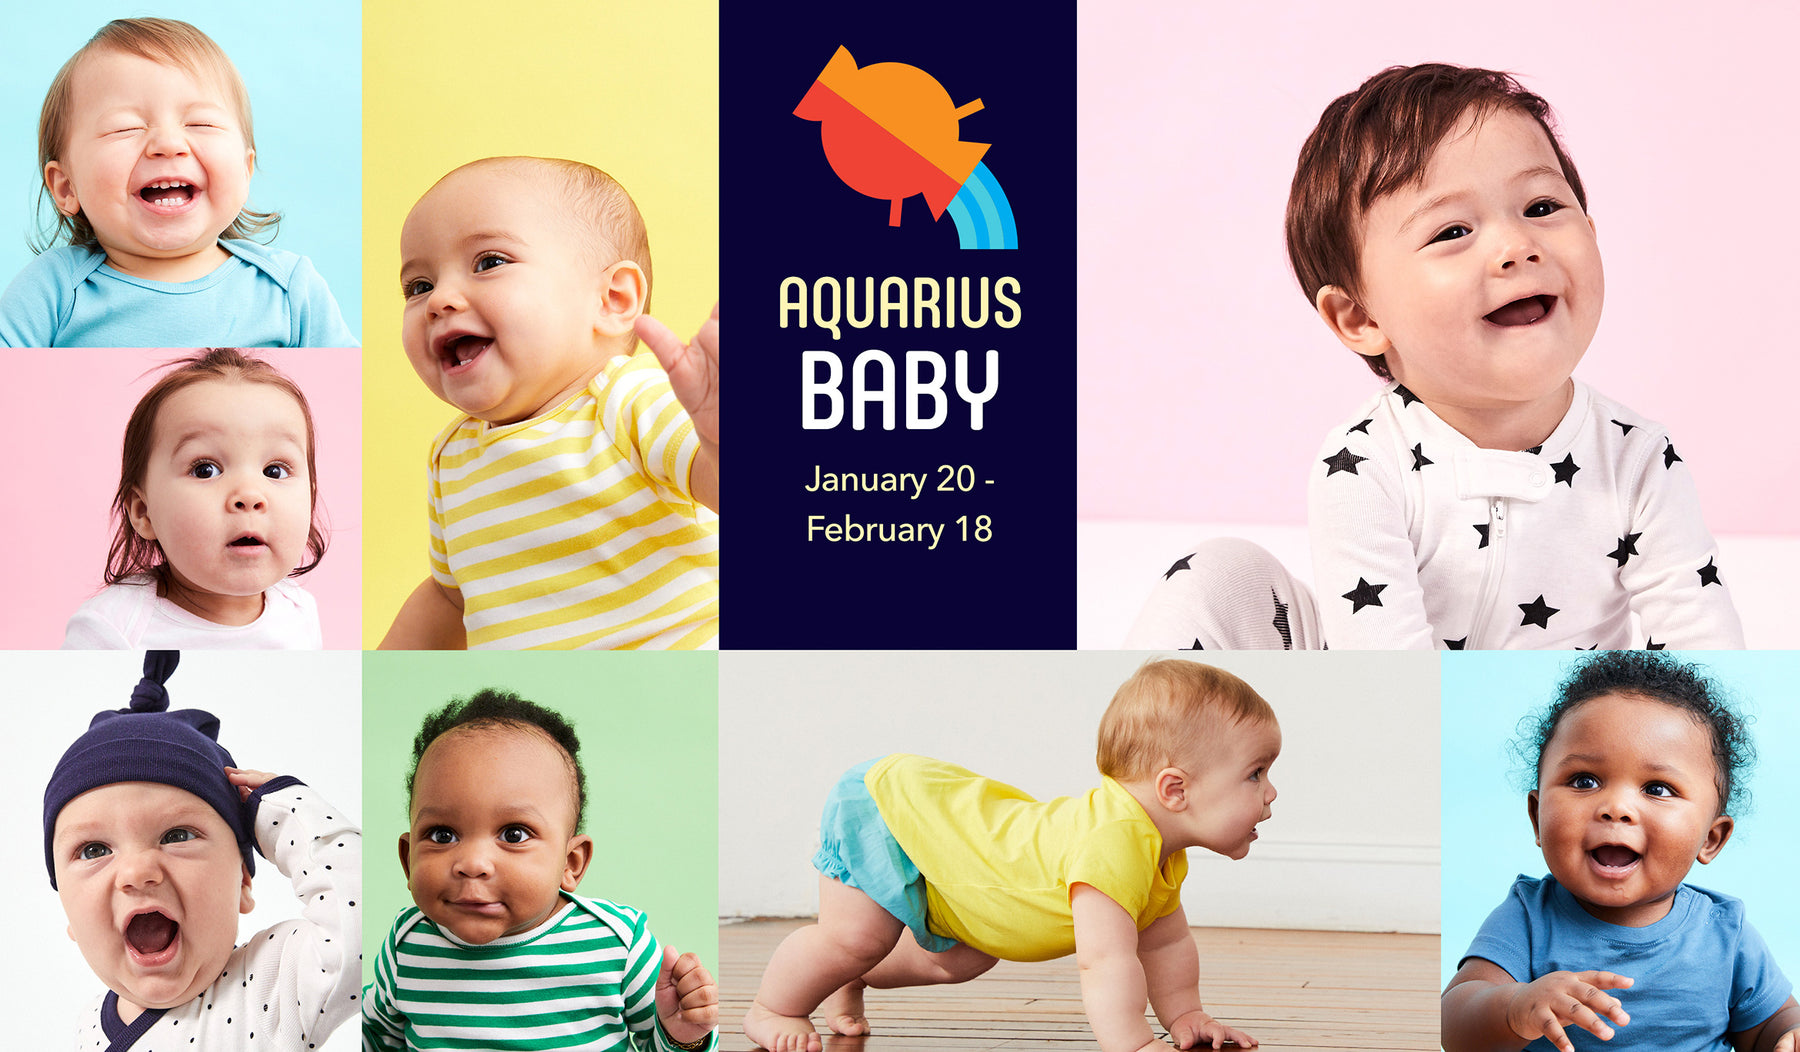 collage of close up portraits of babies in colorful clothing on colorful backgrounds